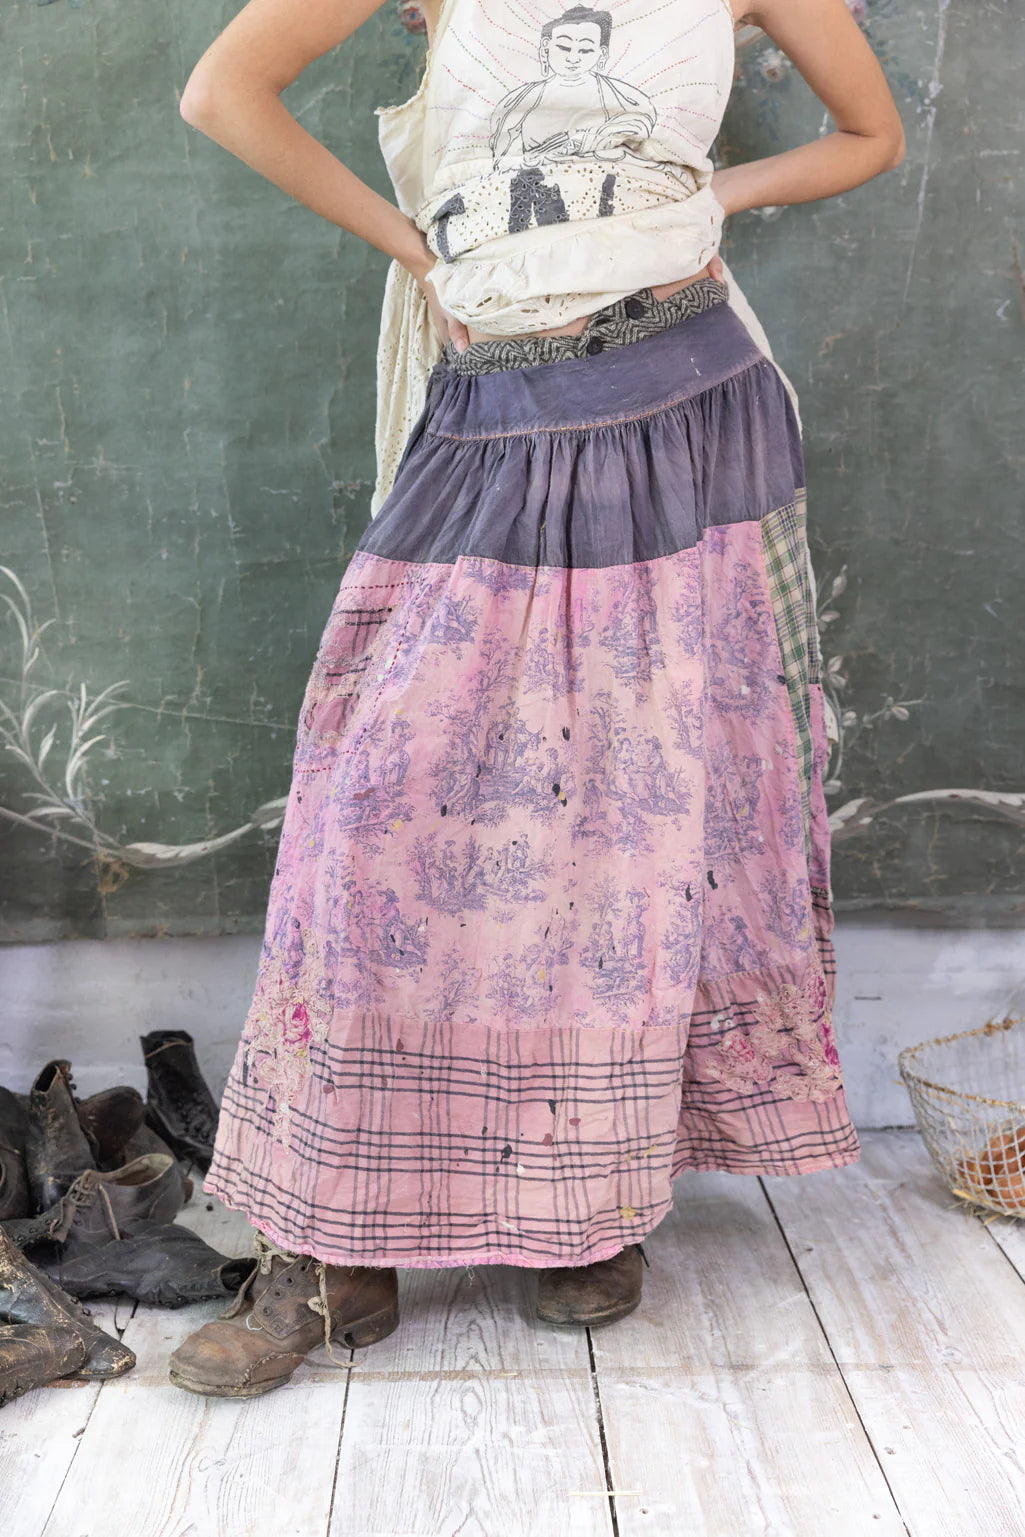 Patchwork Friendship Skirt by Magnolia Pearl